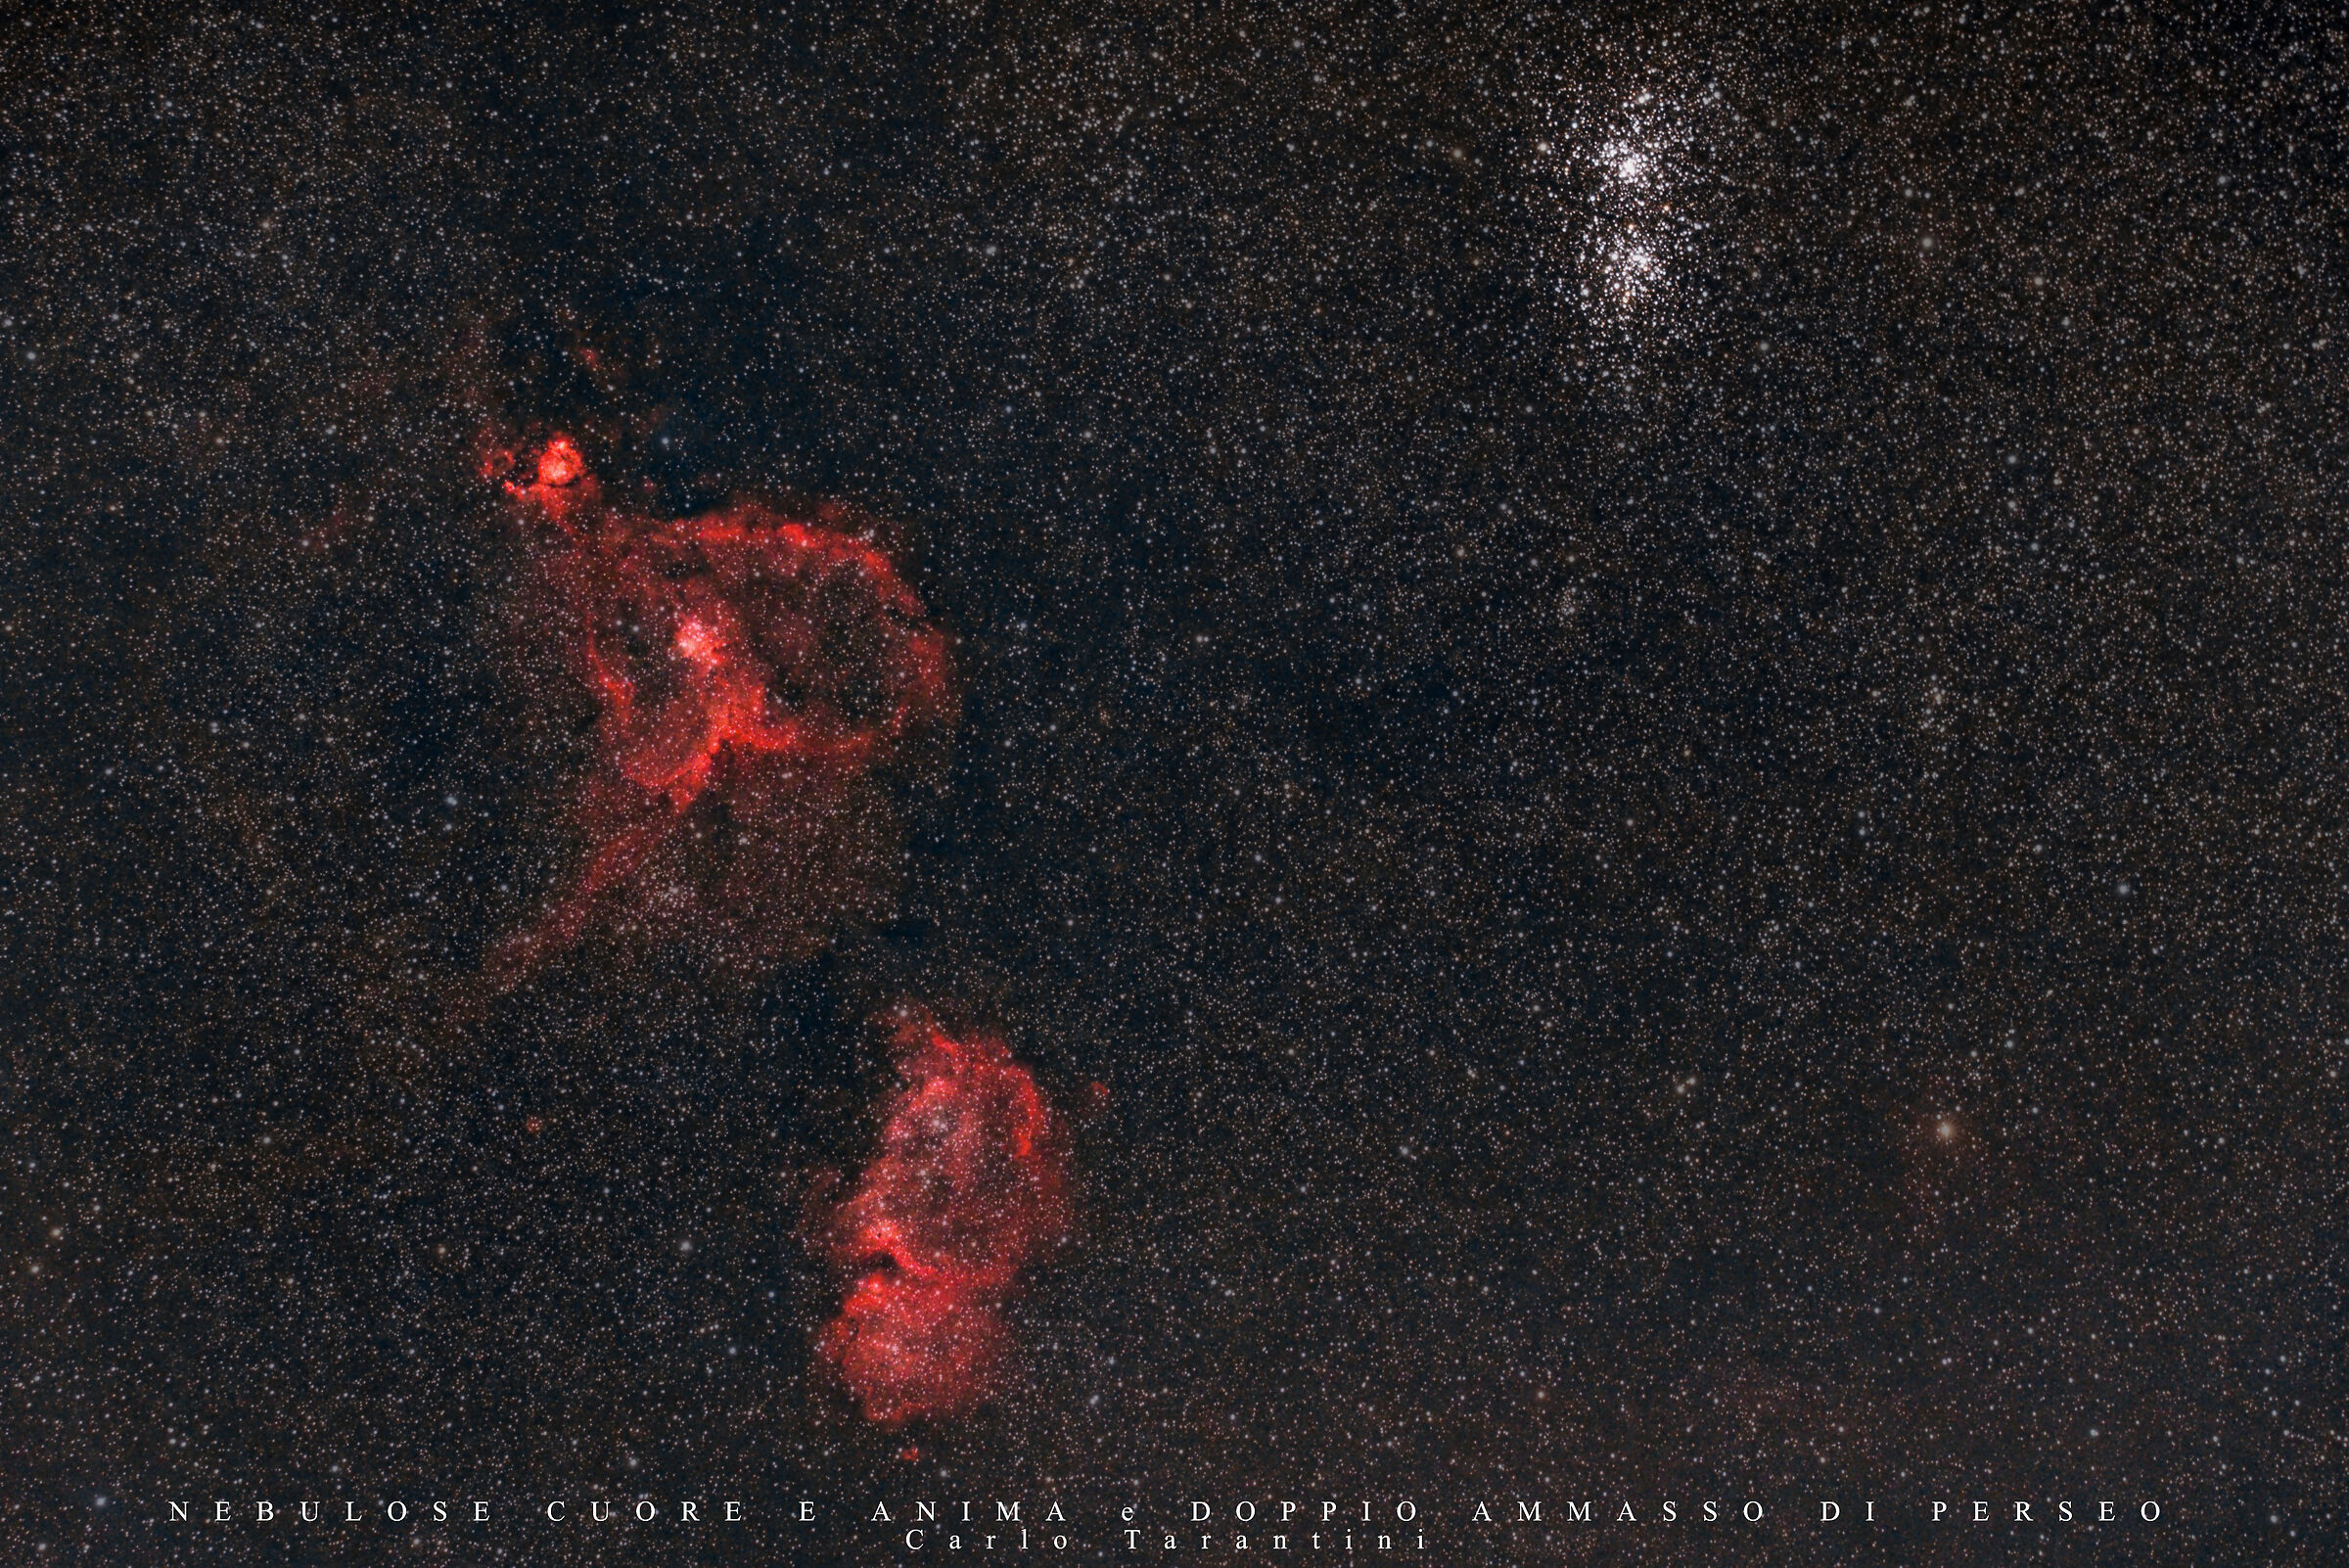 Heart and Soul Nebulae and Perseus Double Cluster ...